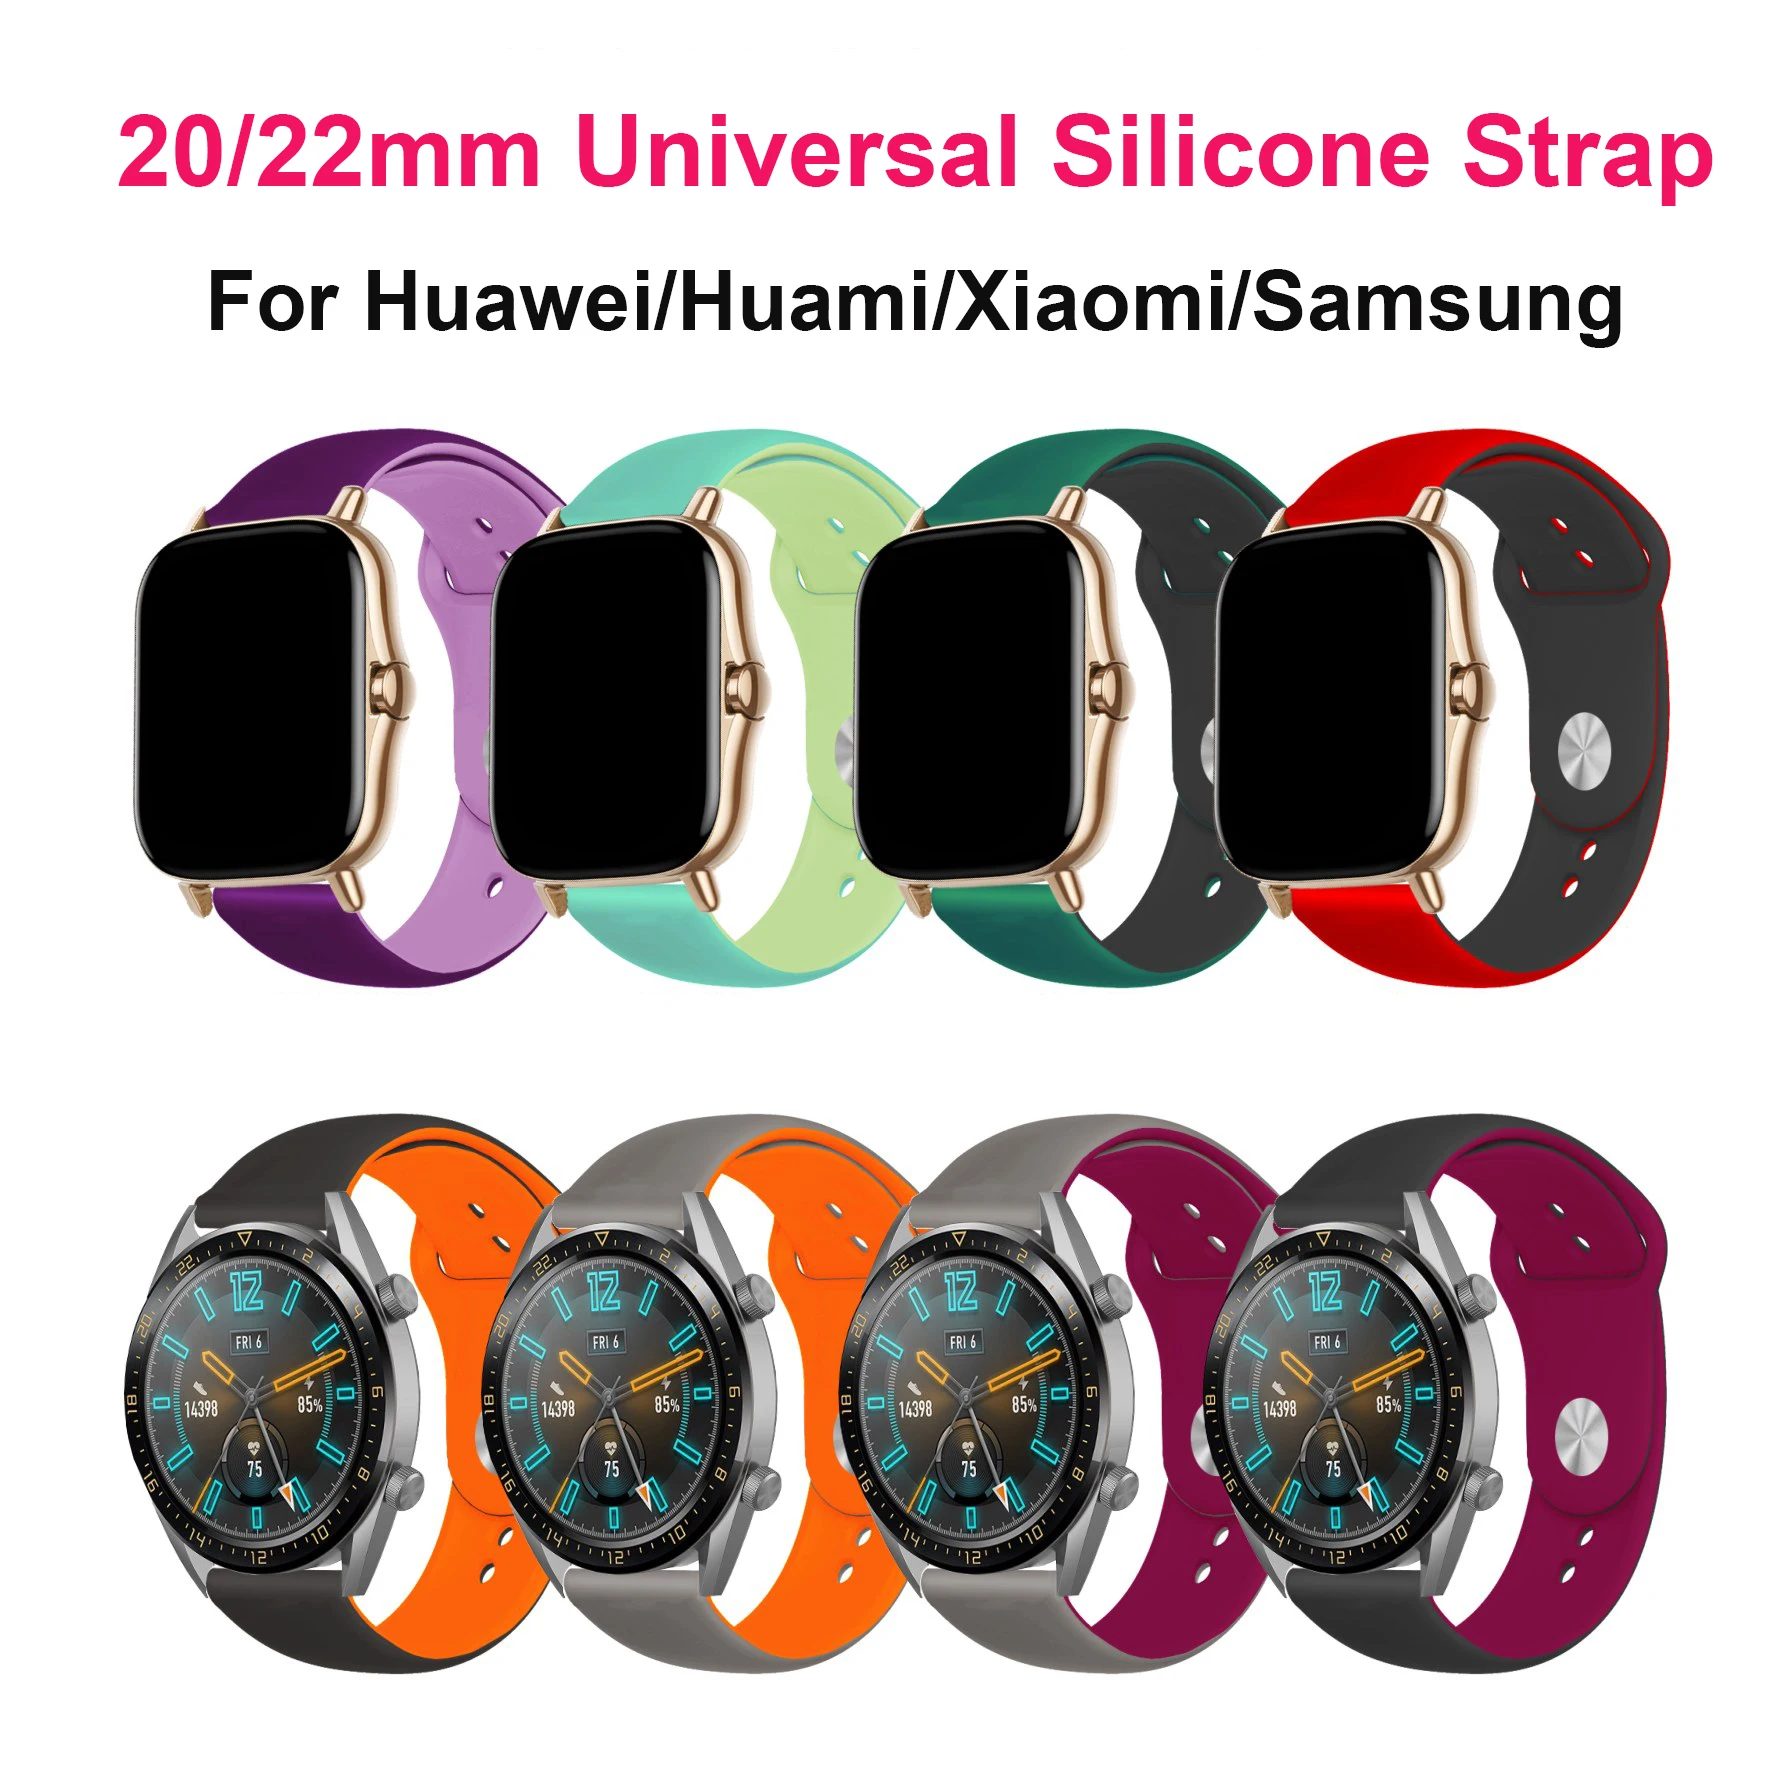 

Universal Silicone Watch Band Quick Release Replace Watch Strap 20mm 22mm Fit For Many Types Garmin Huawei Huami Samsung Watch